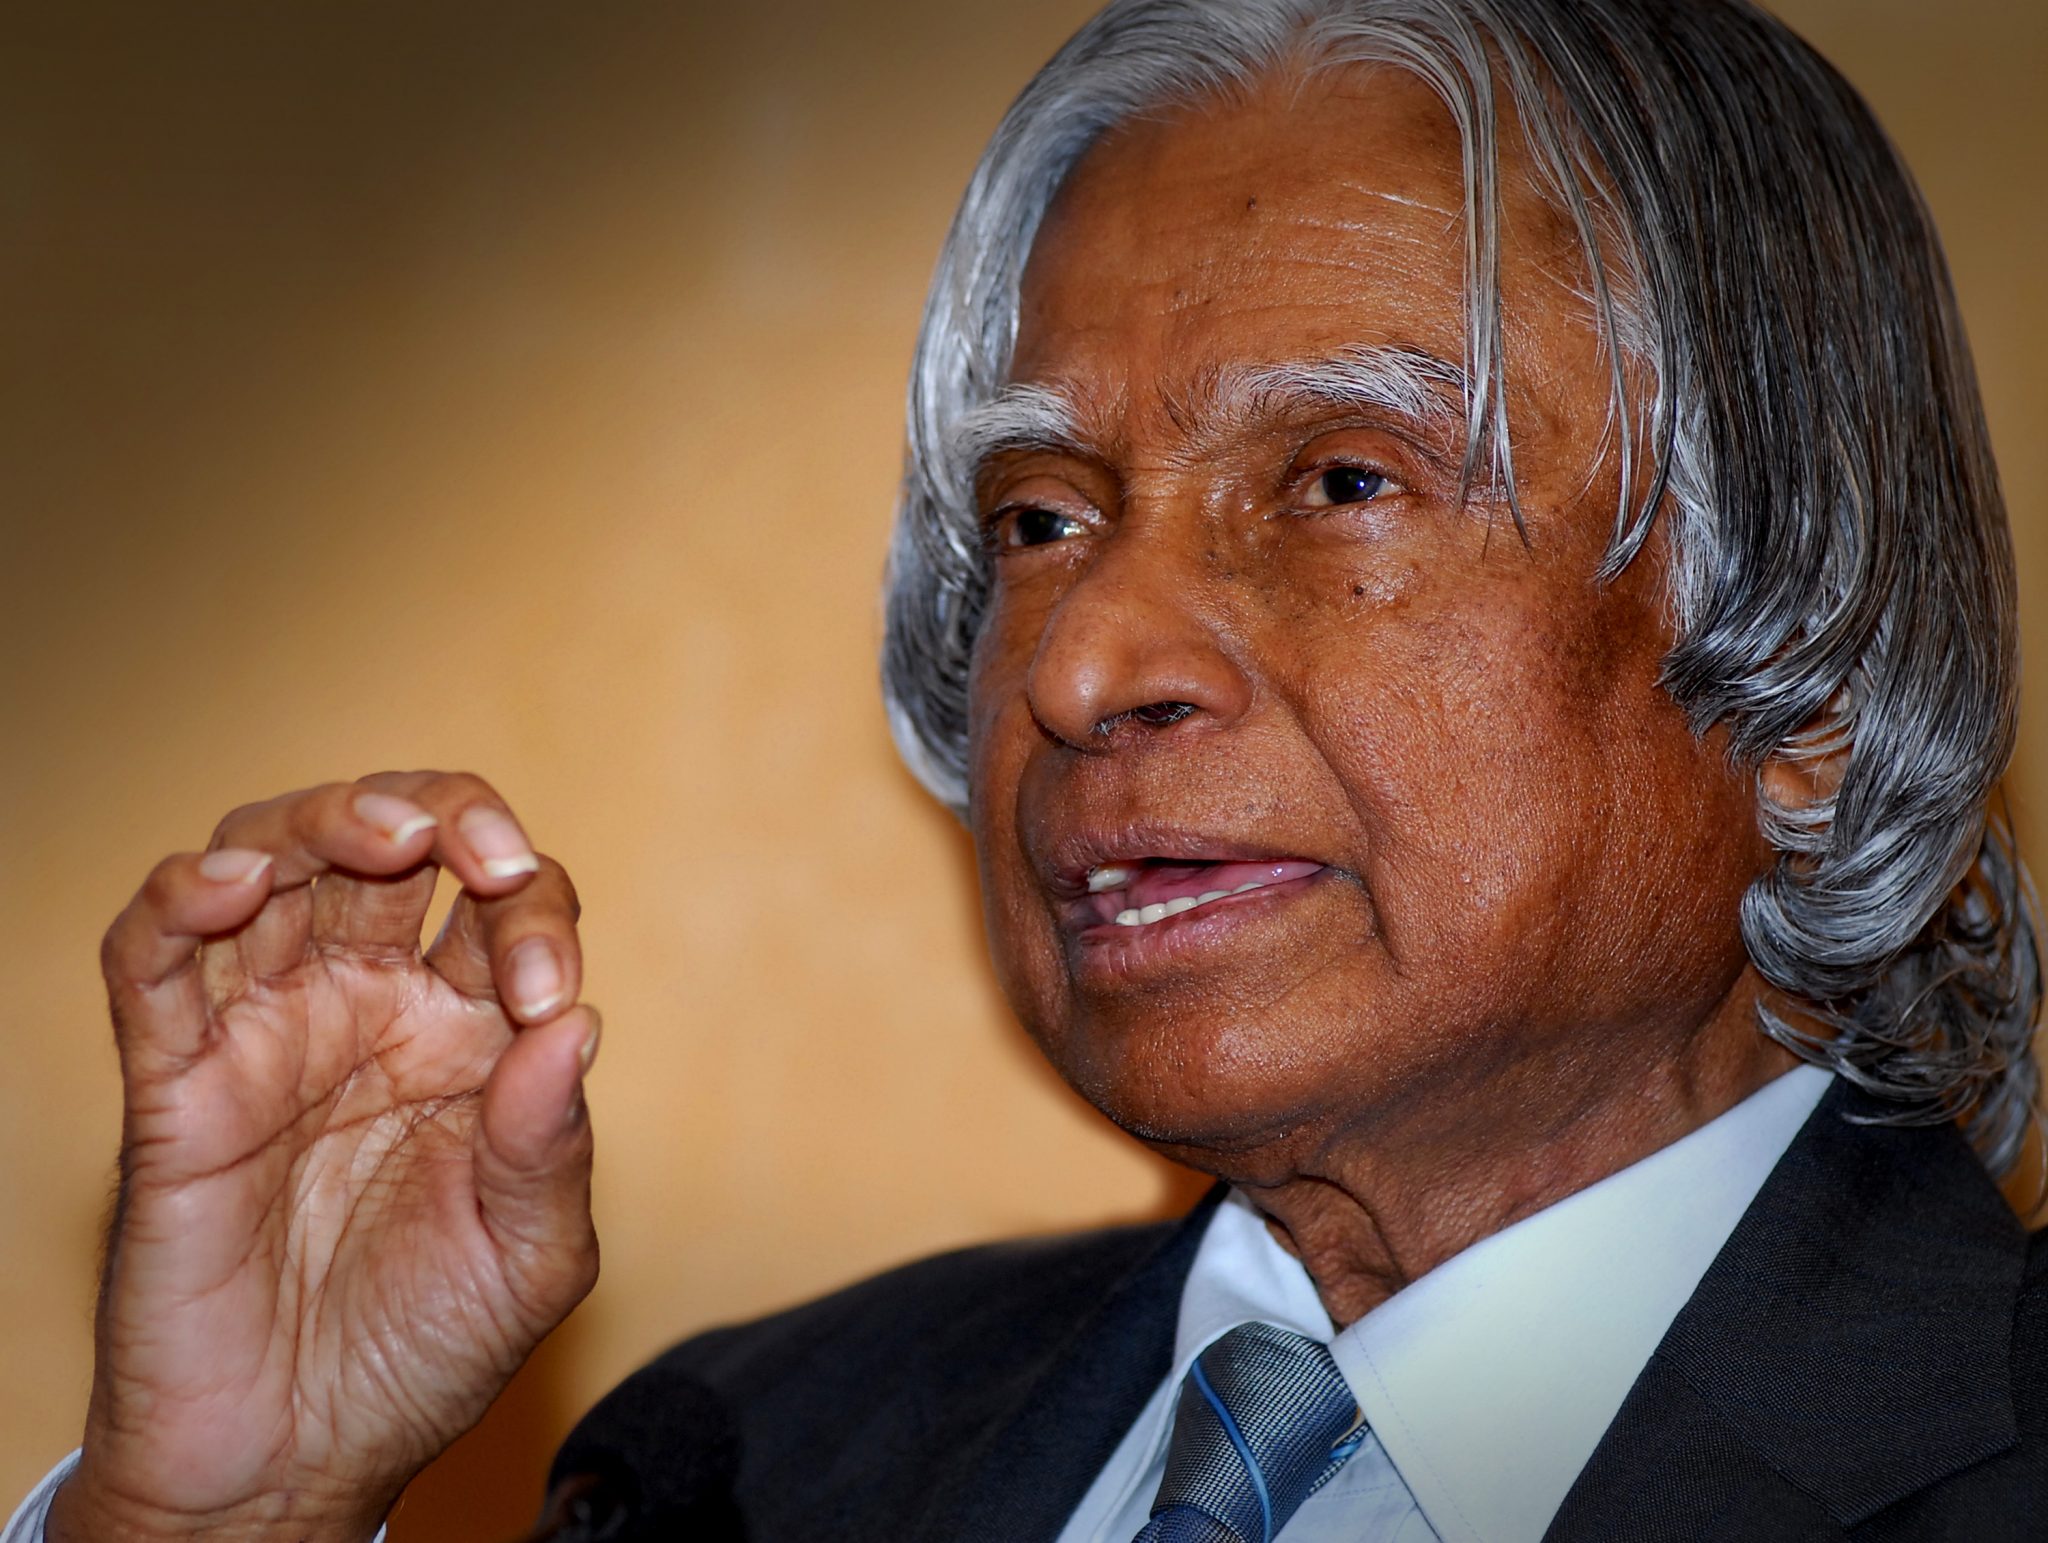 A.P.J. Abdul Kalam Ethnicity, Religion, Race, Career and Nationality